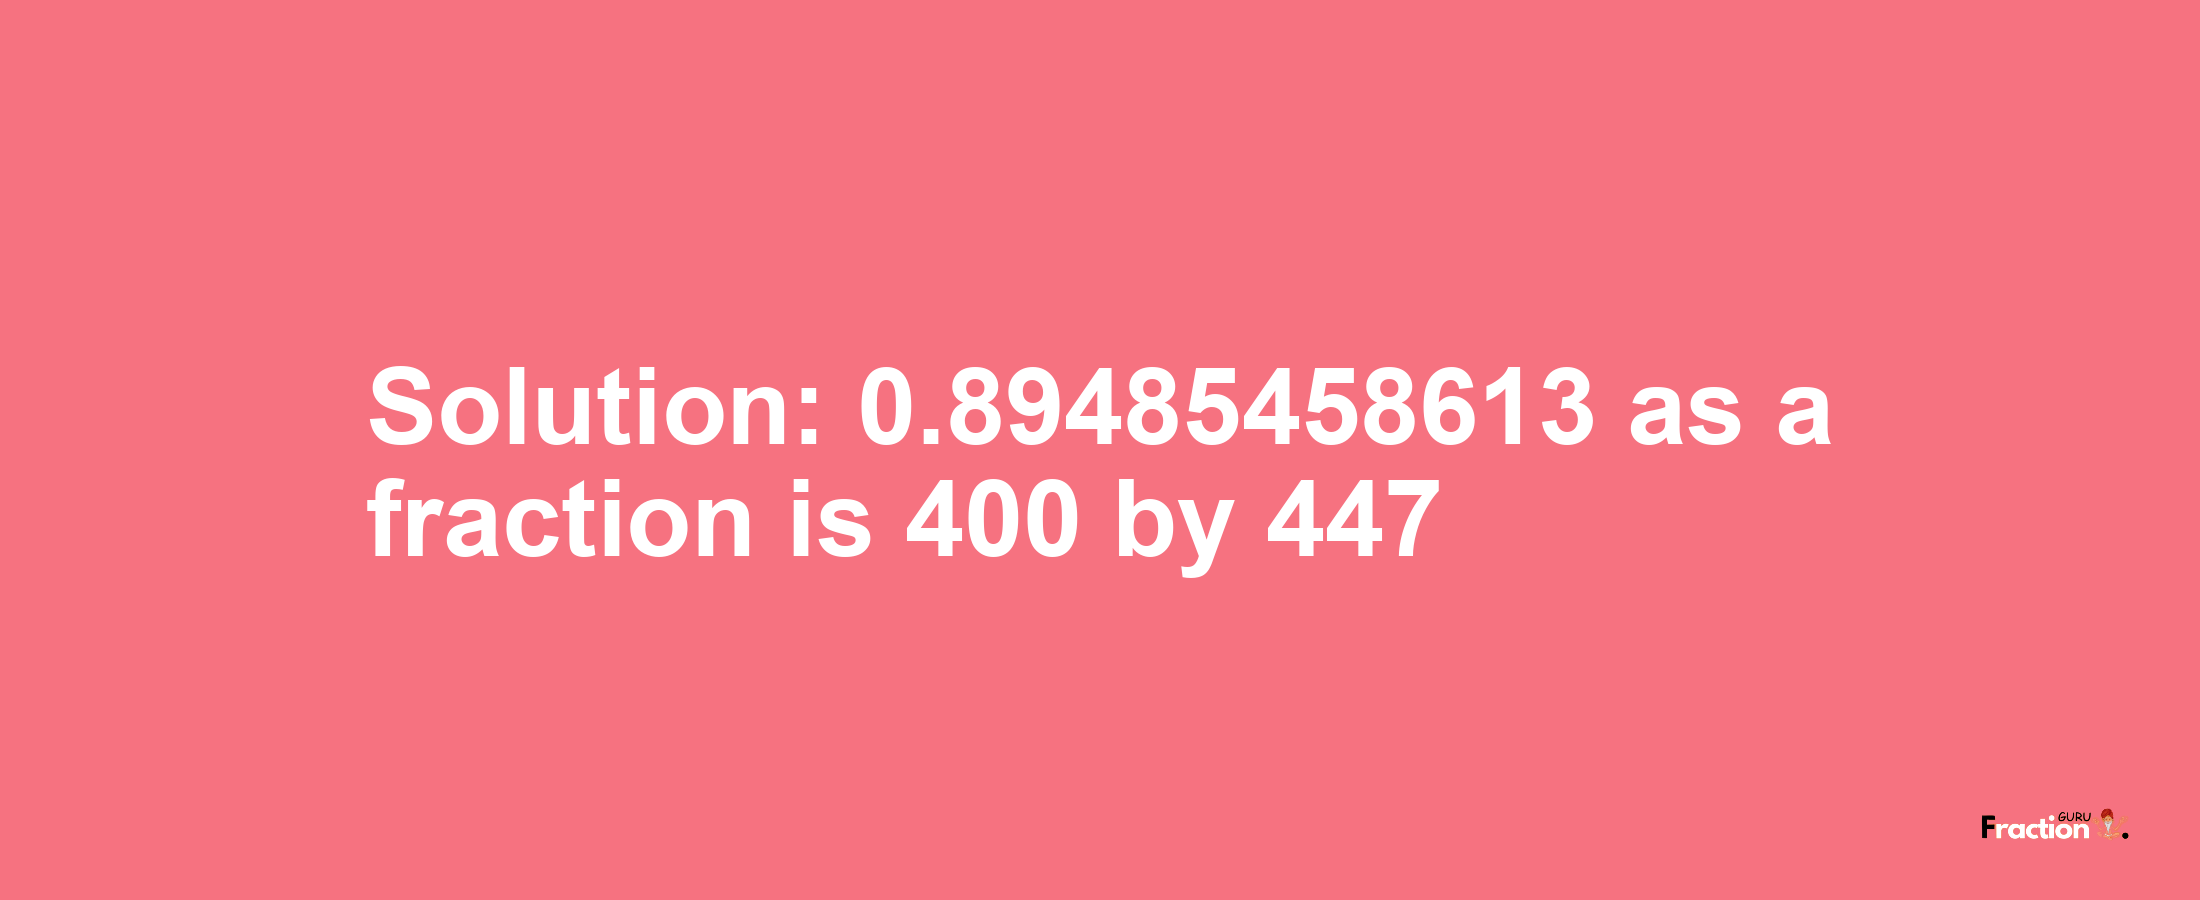 Solution:0.89485458613 as a fraction is 400/447